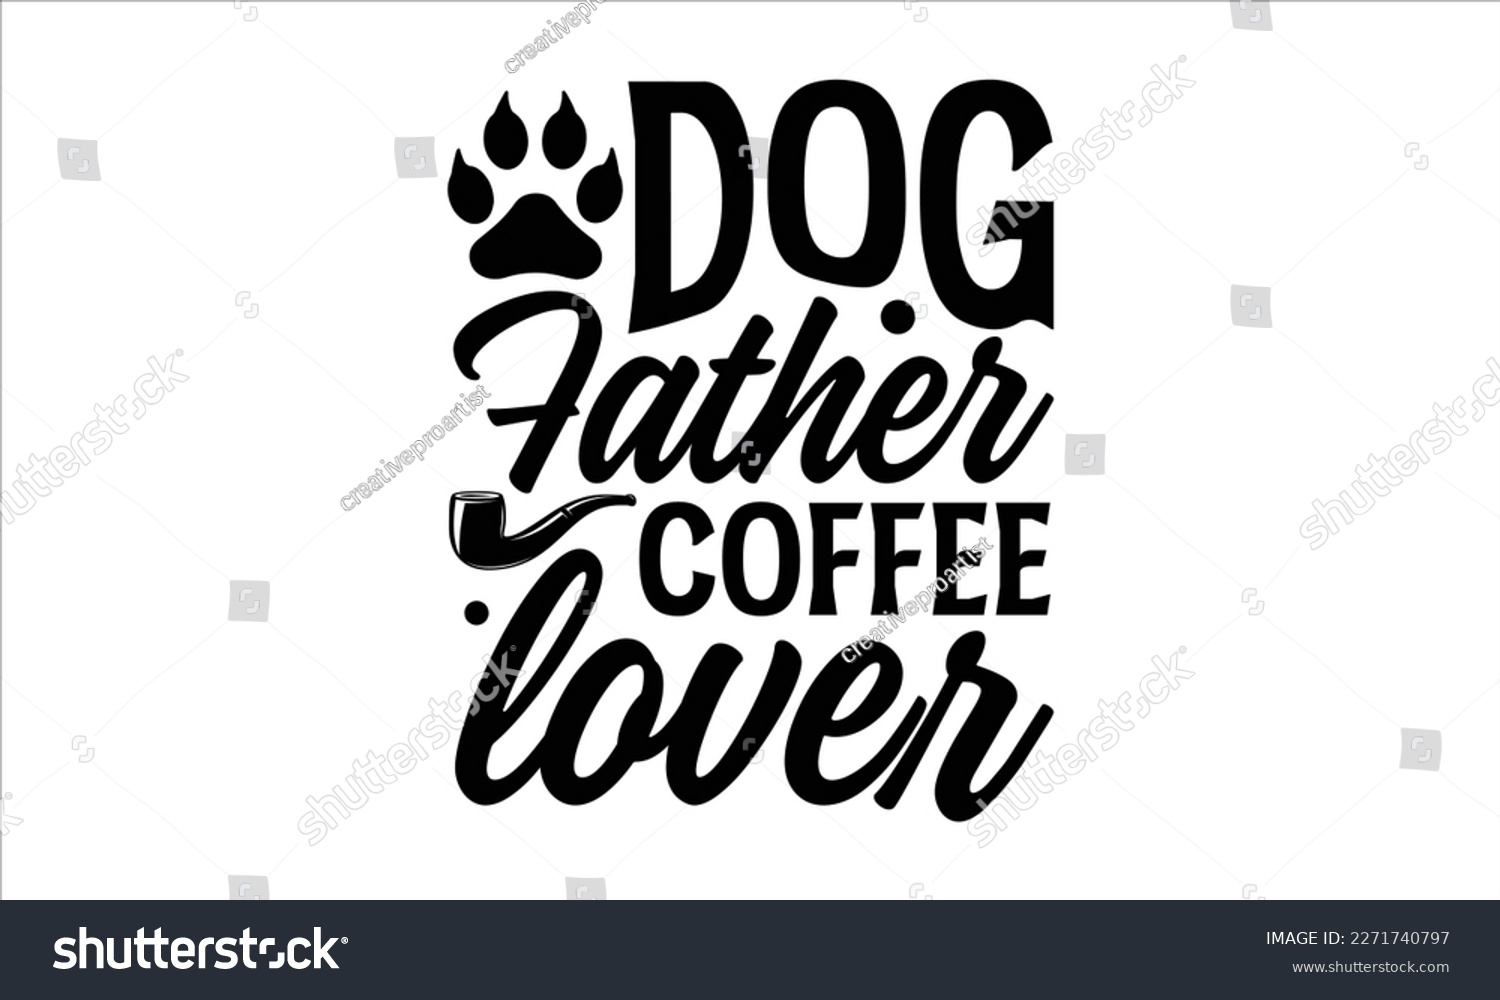 SVG of dog father coffee lover- Father's Day svg design, Hand drawn lettering phrase isolated on white background, Illustration for prints on t-shirts and bags, posters, cards eps 10. svg